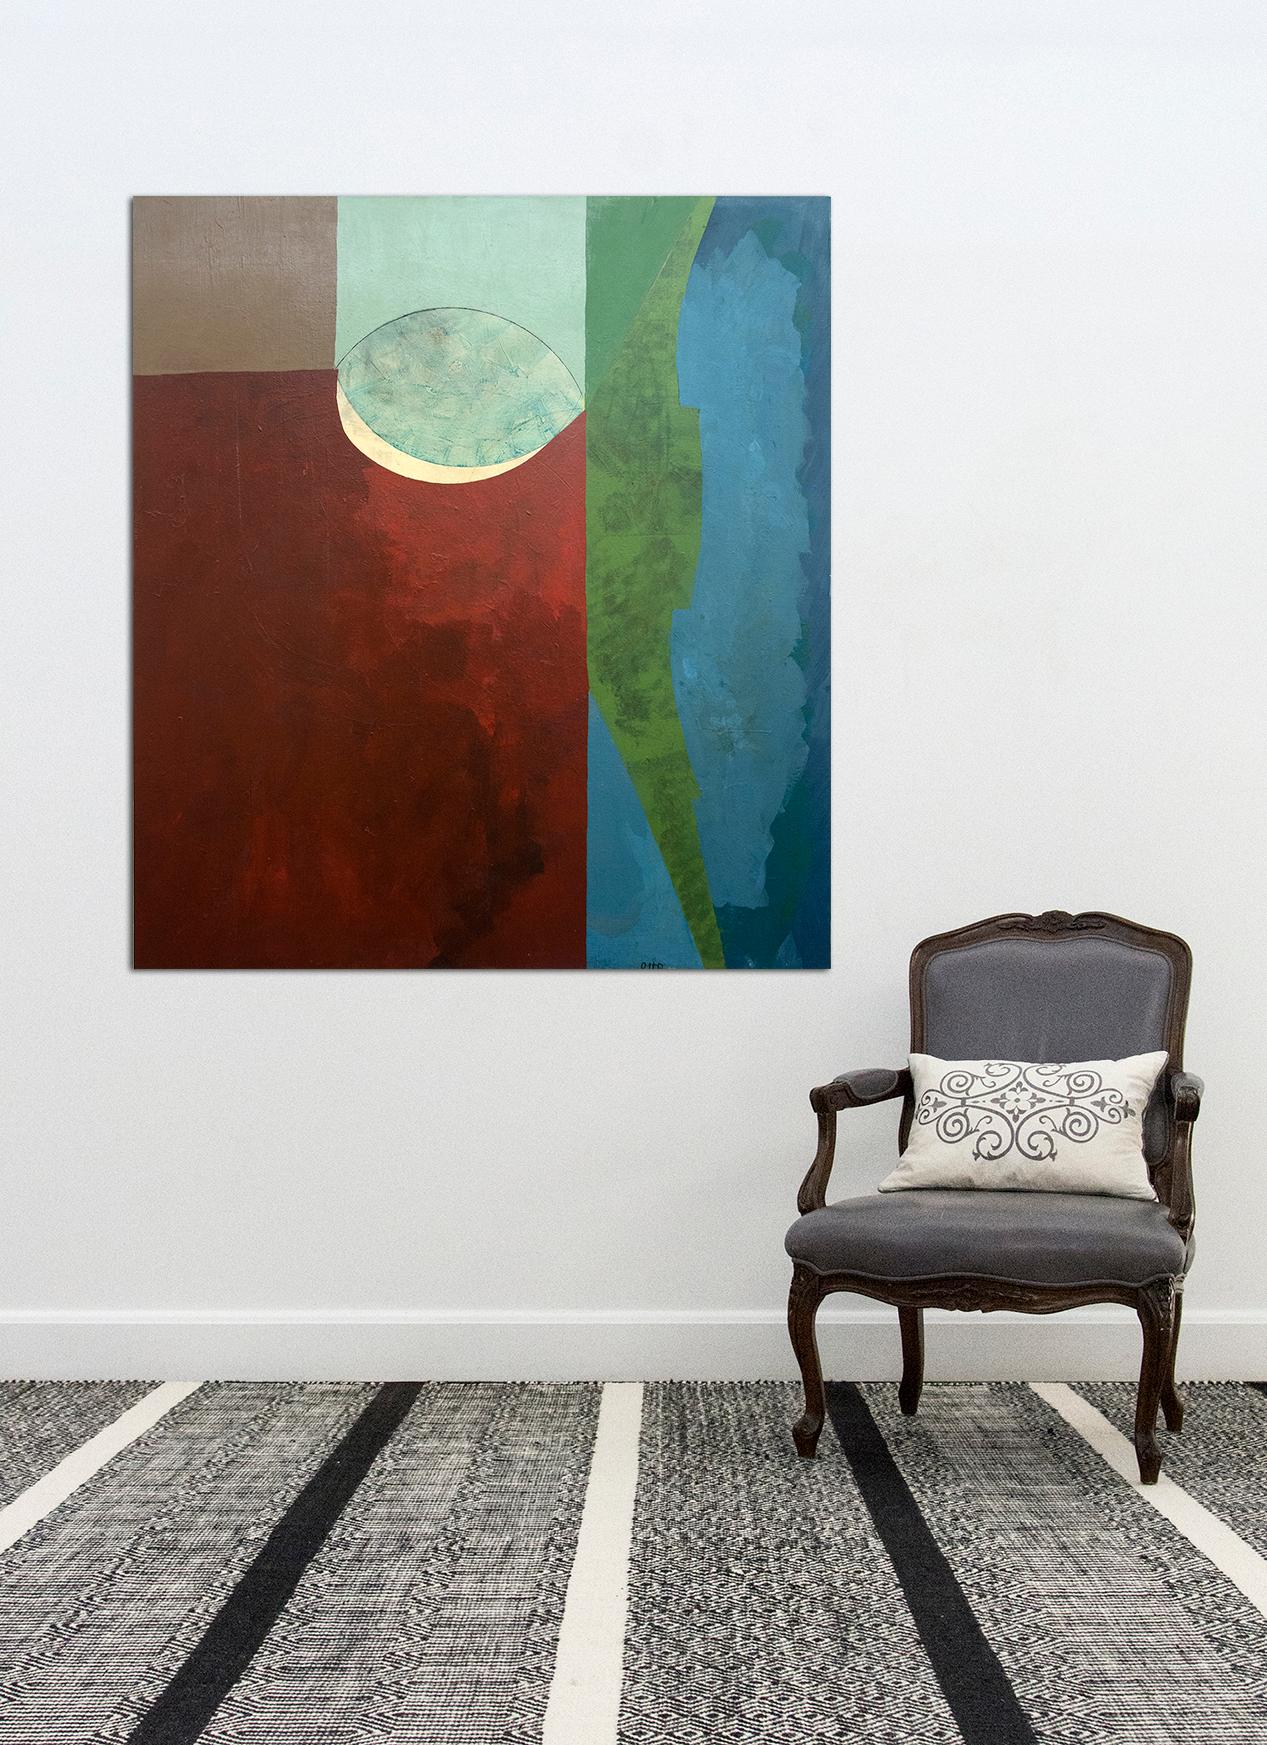 A leaf shape is poised within balanced passages of red, green and blue in this masterful acrylic by Otto Rogers. Painted in 2018, this vibrant yet contemplative composition is an exploration of the theme of motion in stillness using modernist forms.